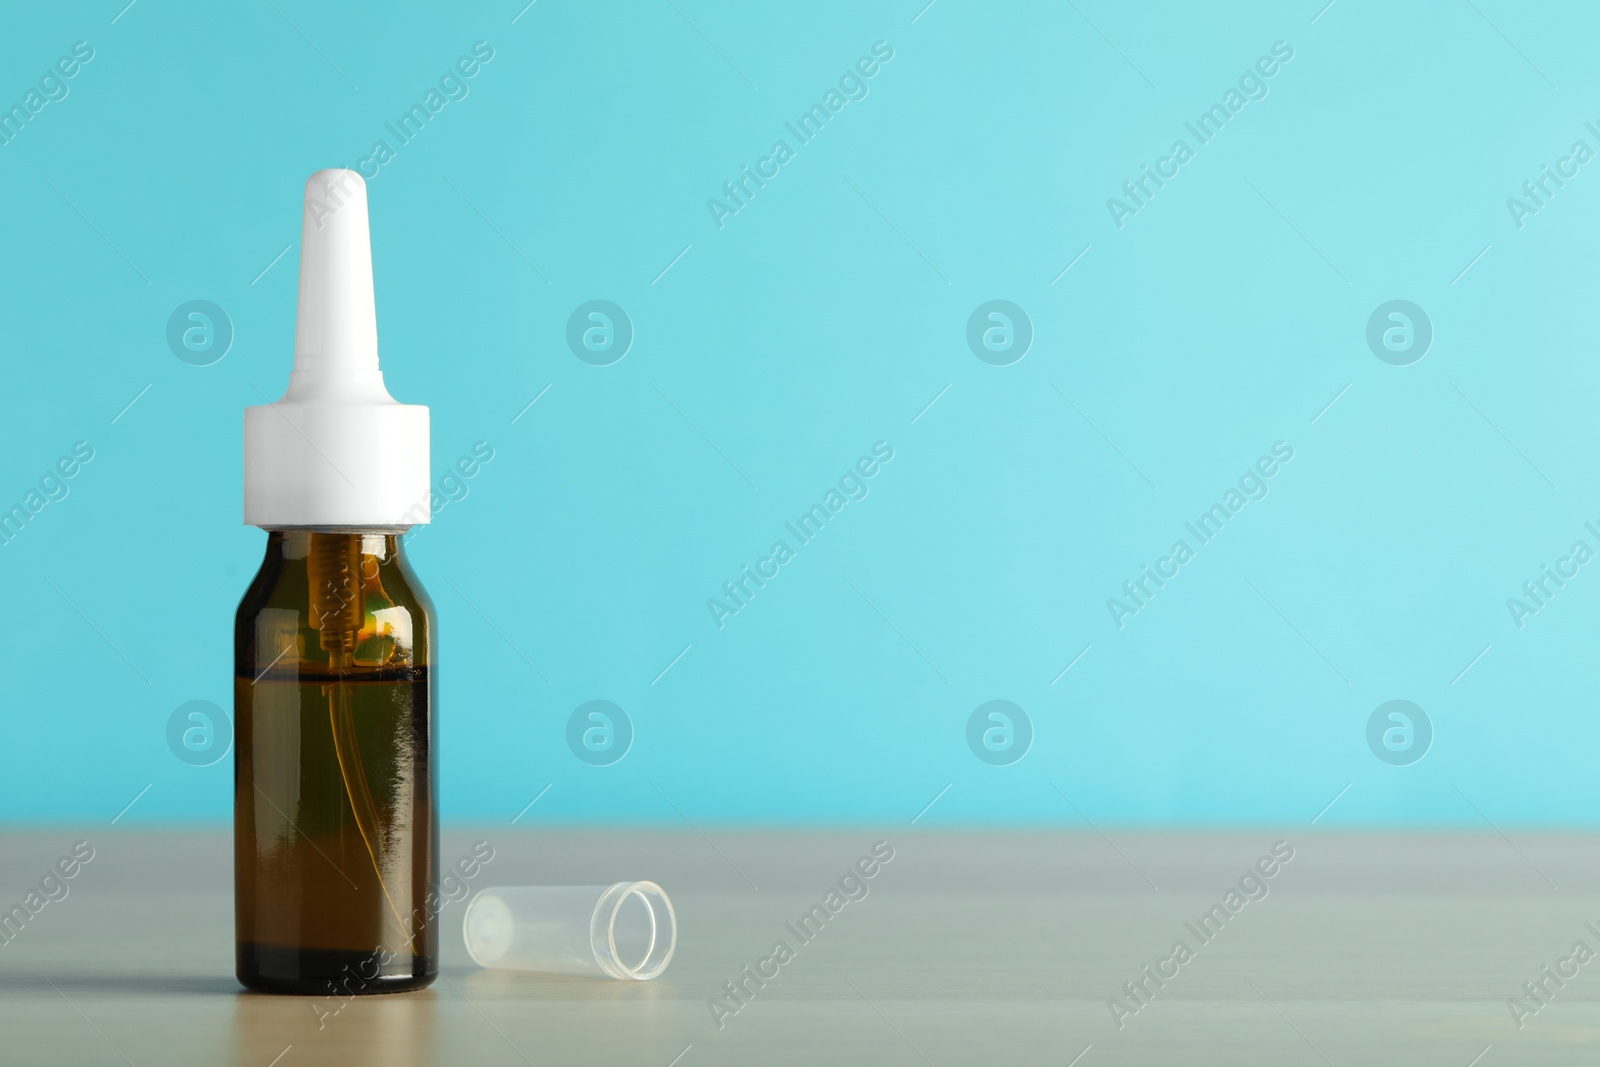 Photo of Bottle of nasal spray on table against light blue background, space for text